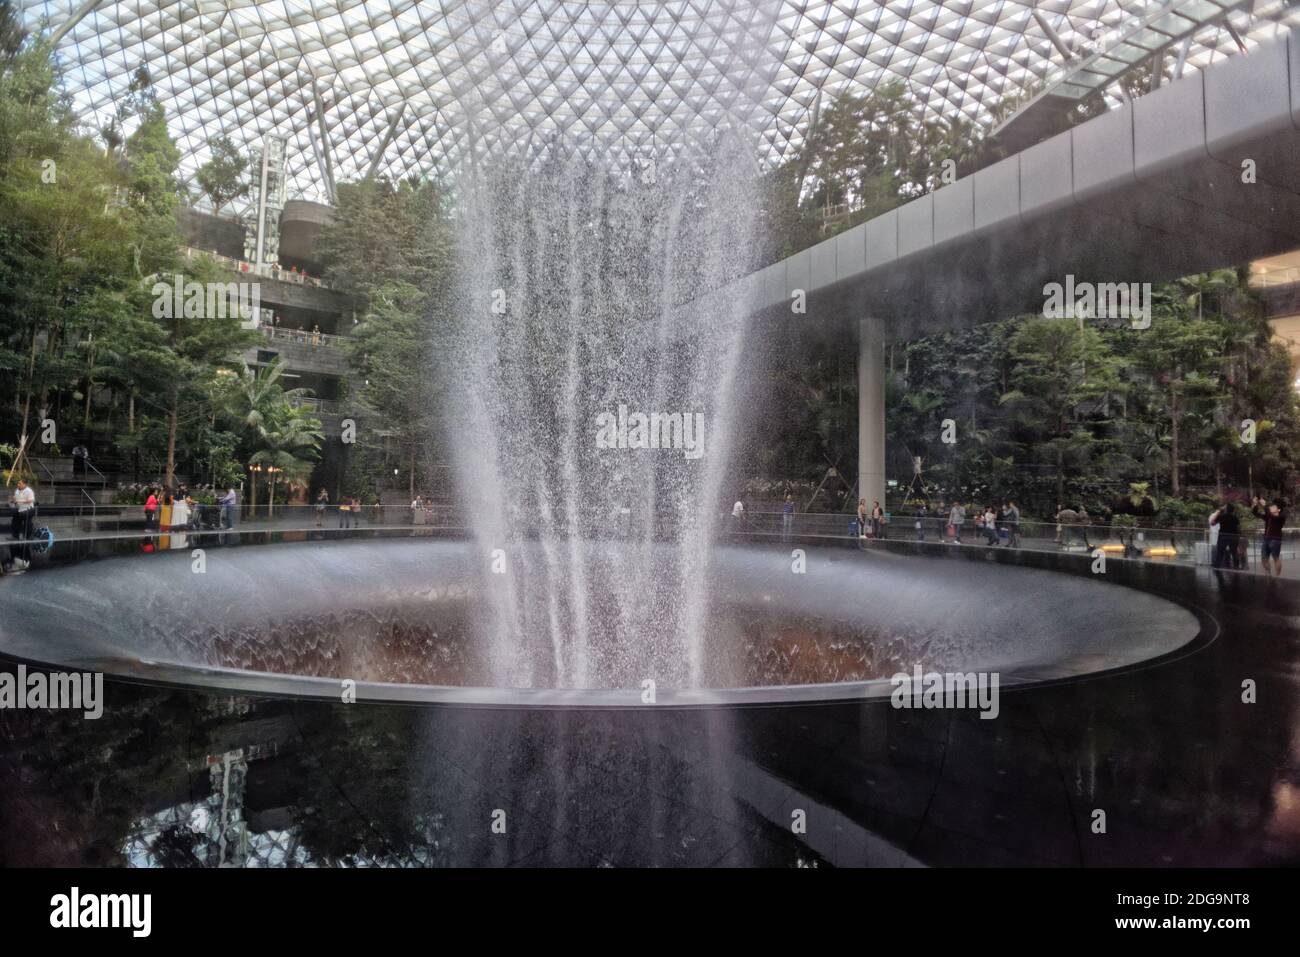 The indoor waterfall within the Jewel, part of Singapore Changi airport Stock Photo